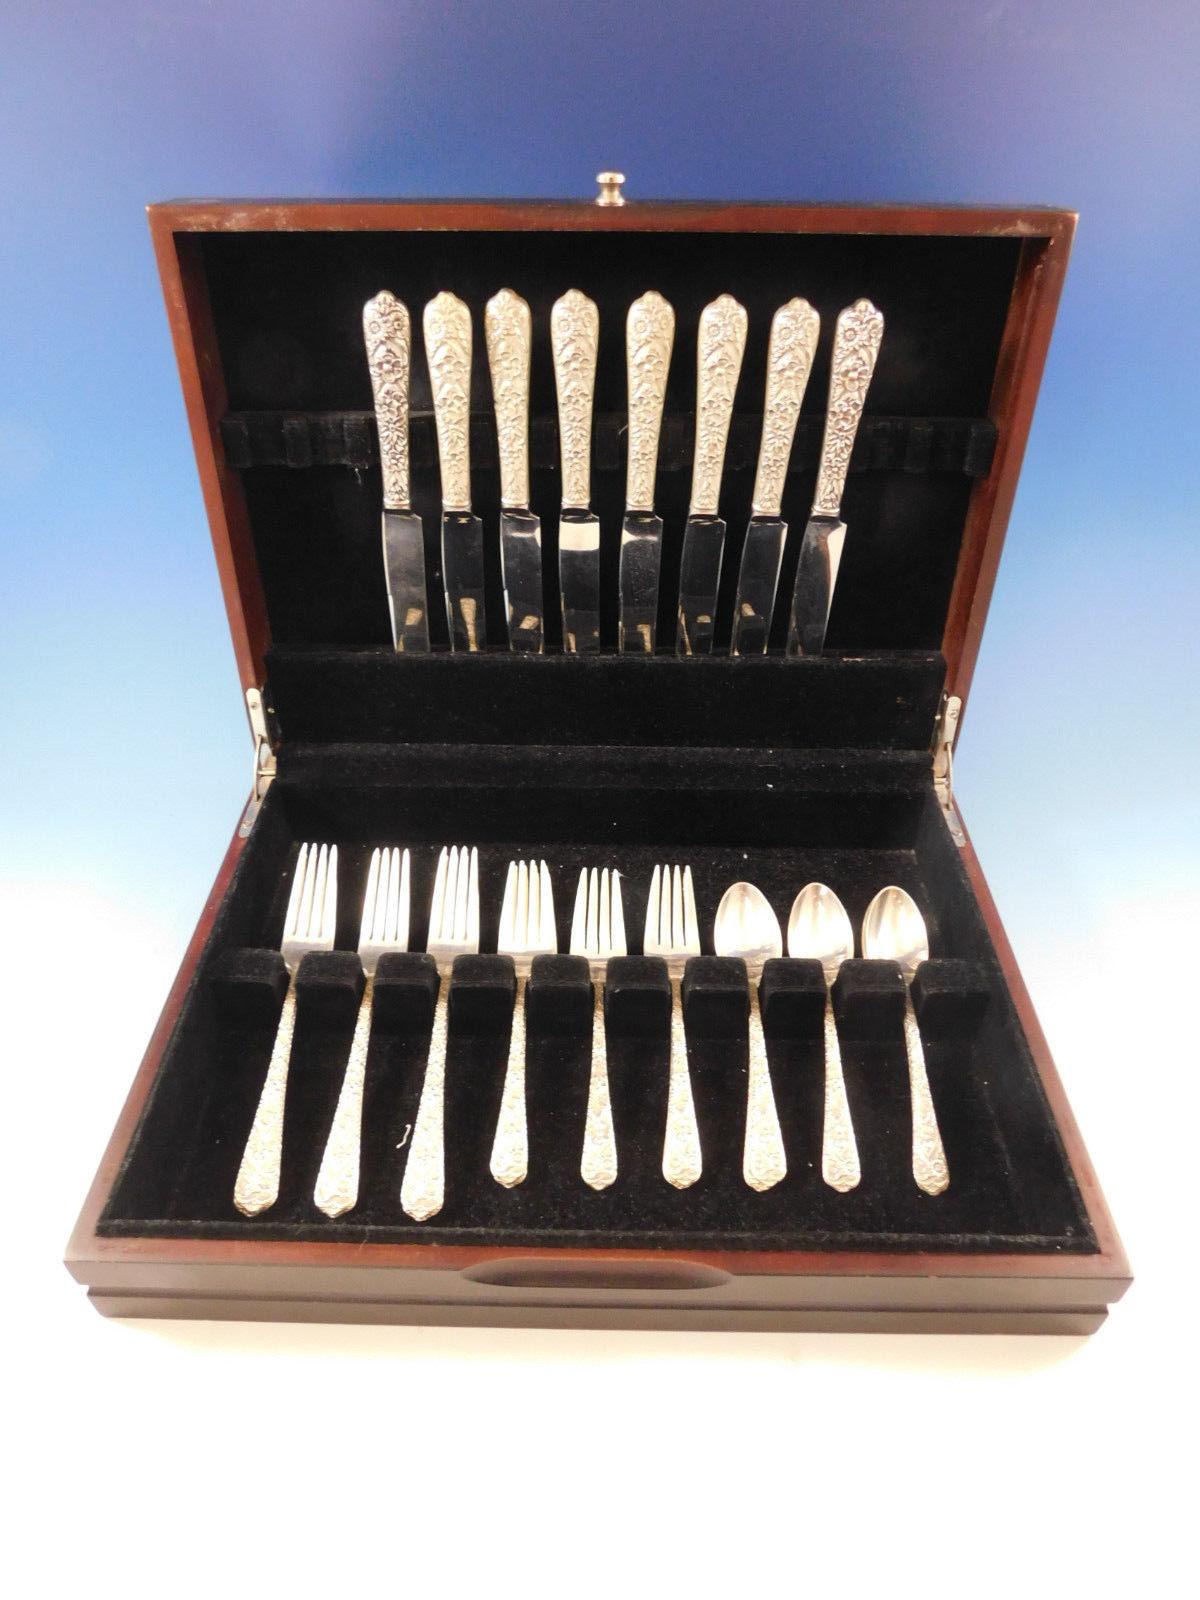 Radiant rose by International repoussed sterling silver flatware set - 32 pieces. This set includes:

Eight knives, 9 1/8